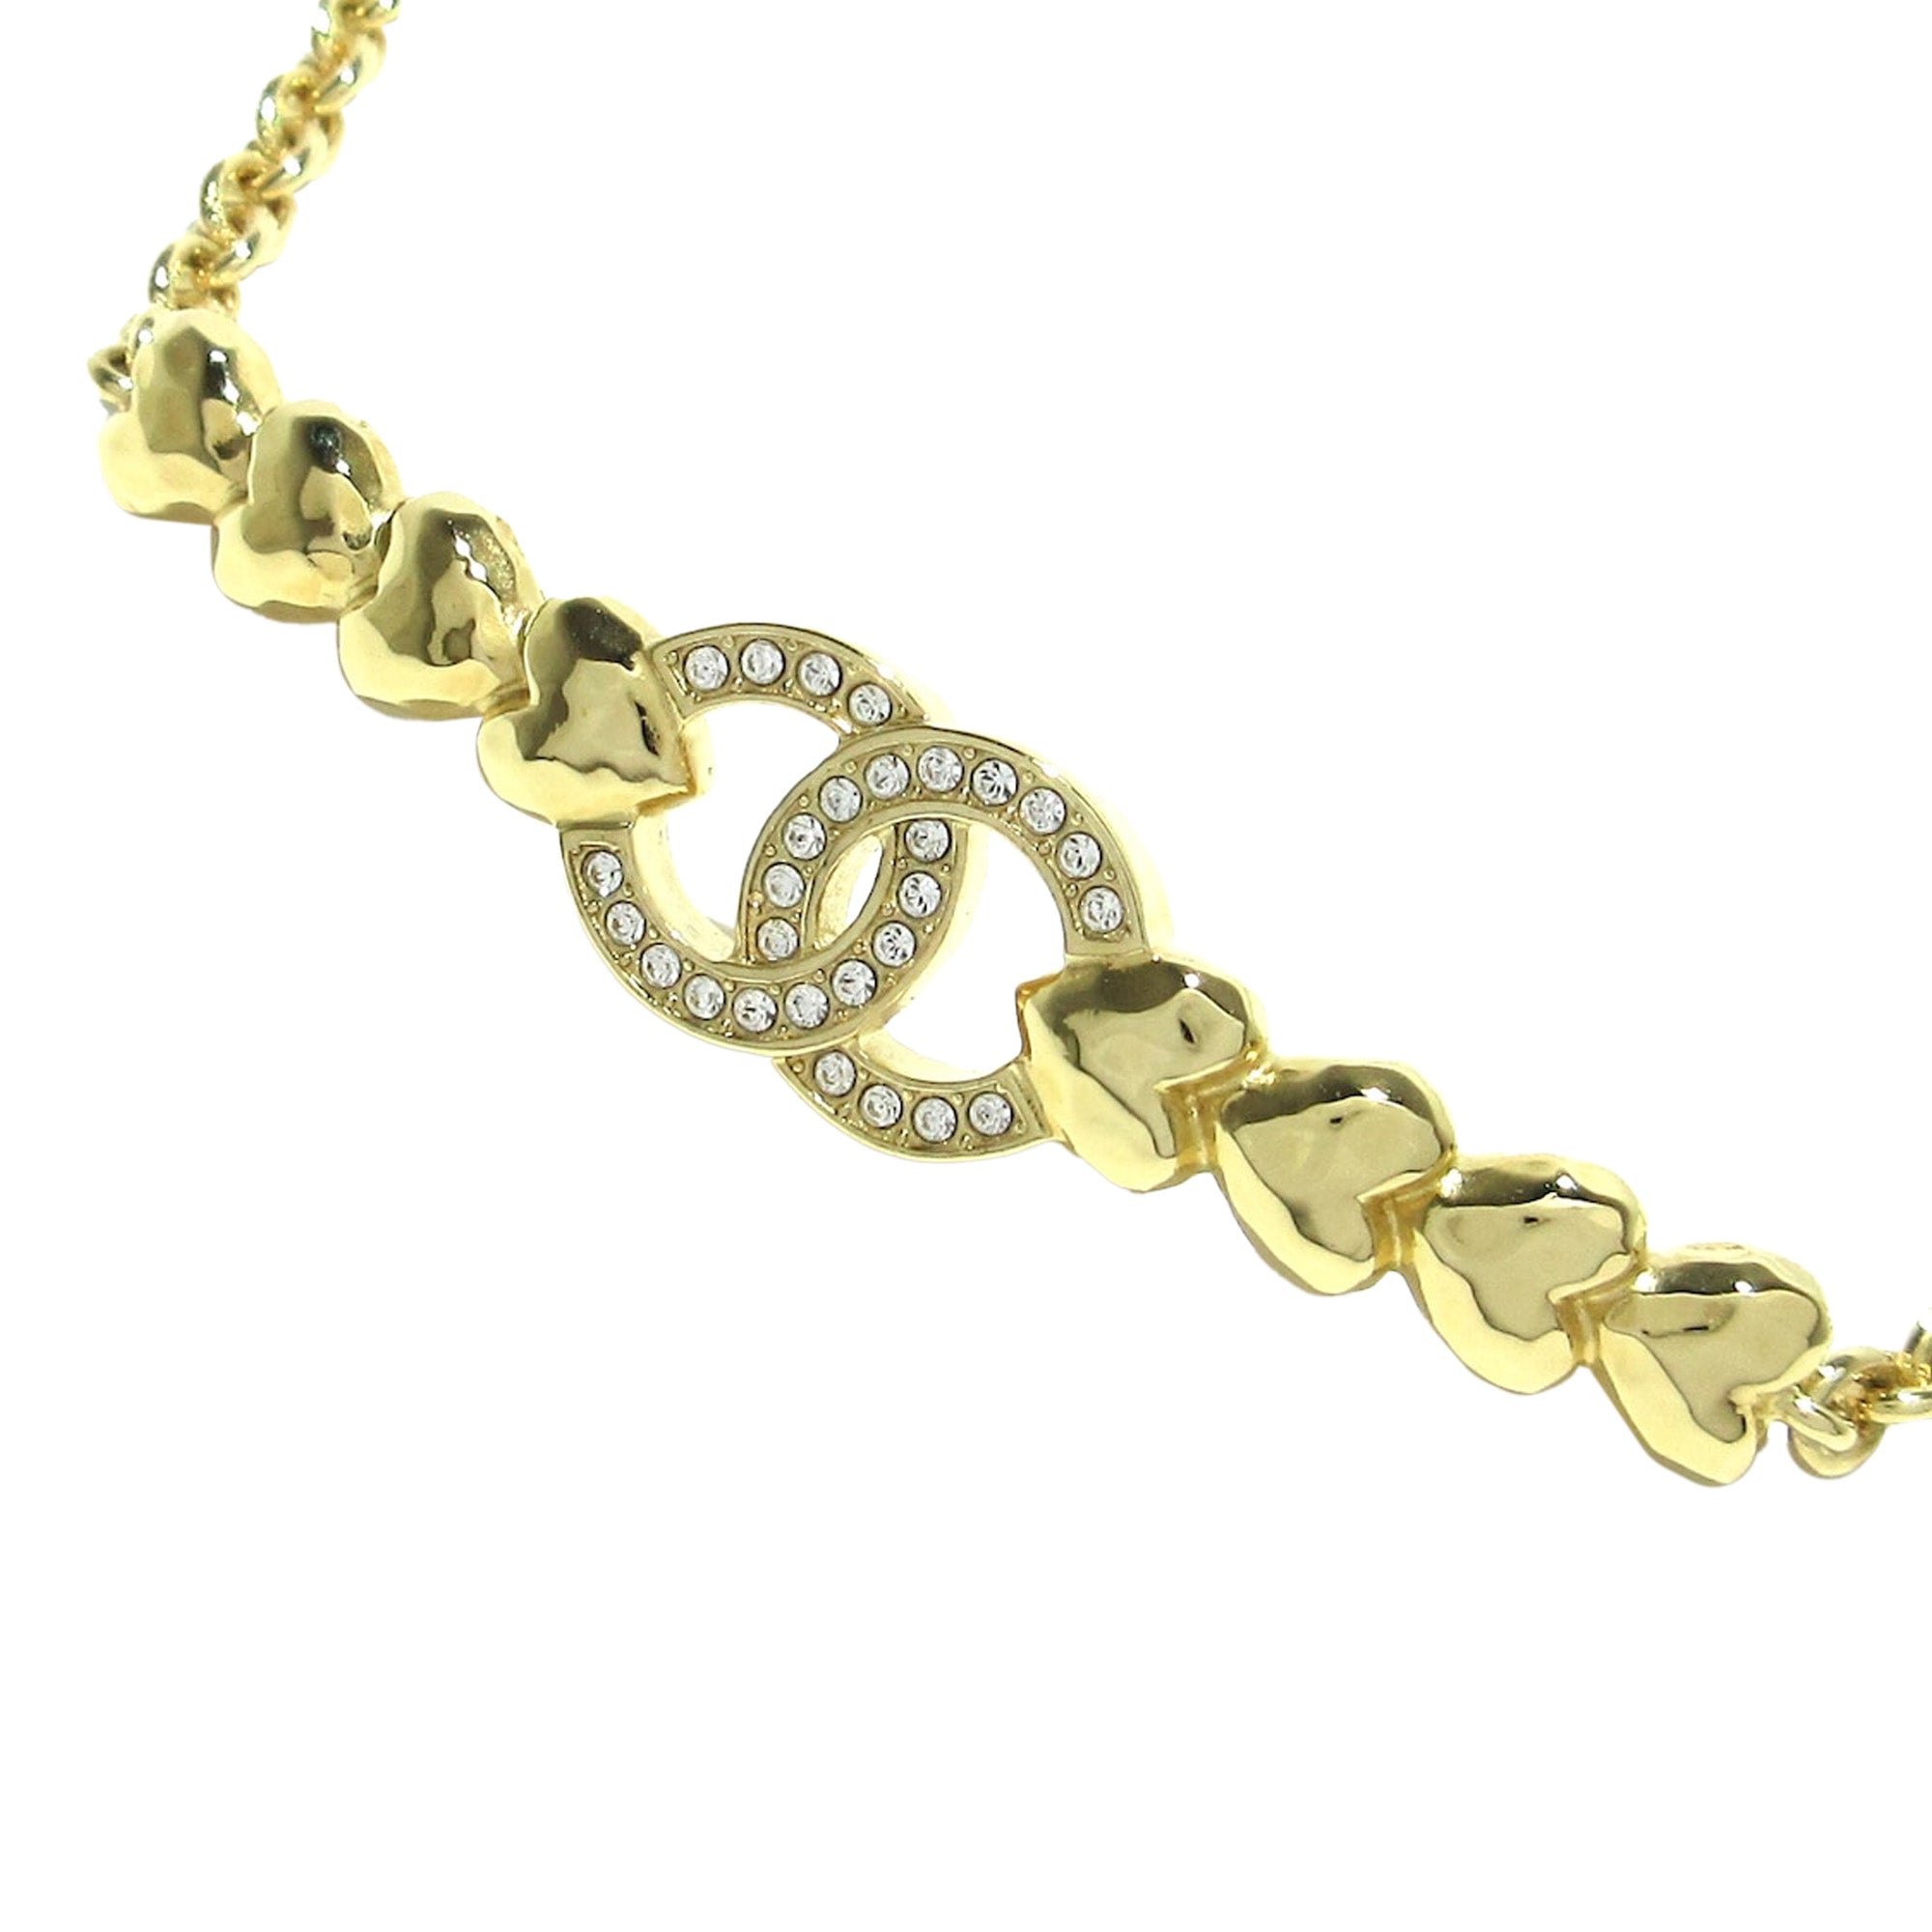 Chanel Gold Tone Chain Link Choker Necklace Chanel